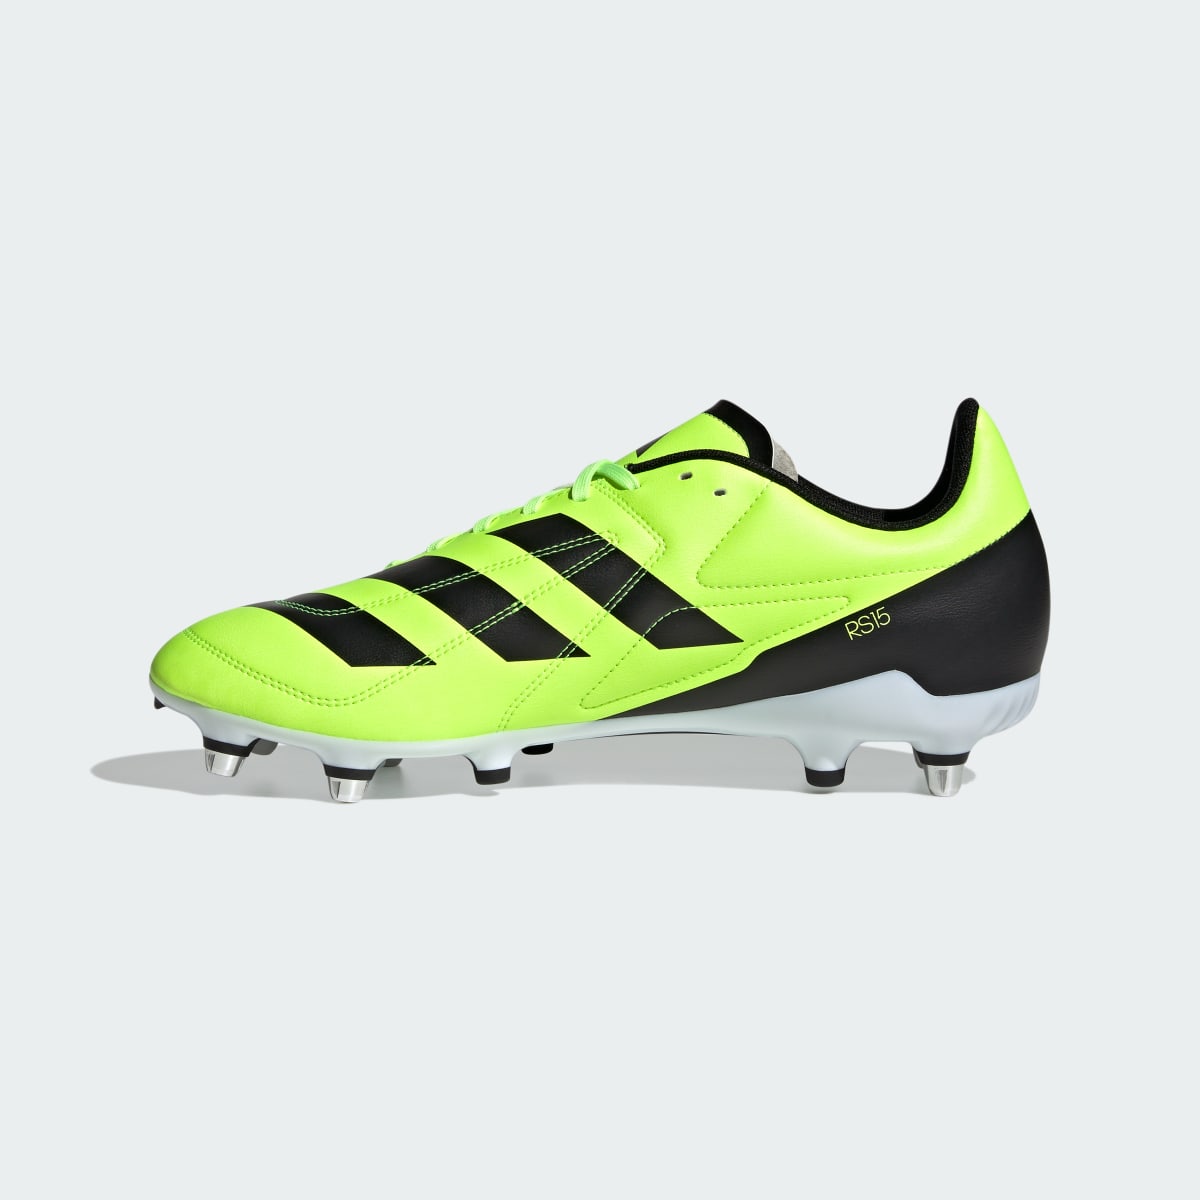 Adidas RS15 Soft Ground Rugby Boots. 10